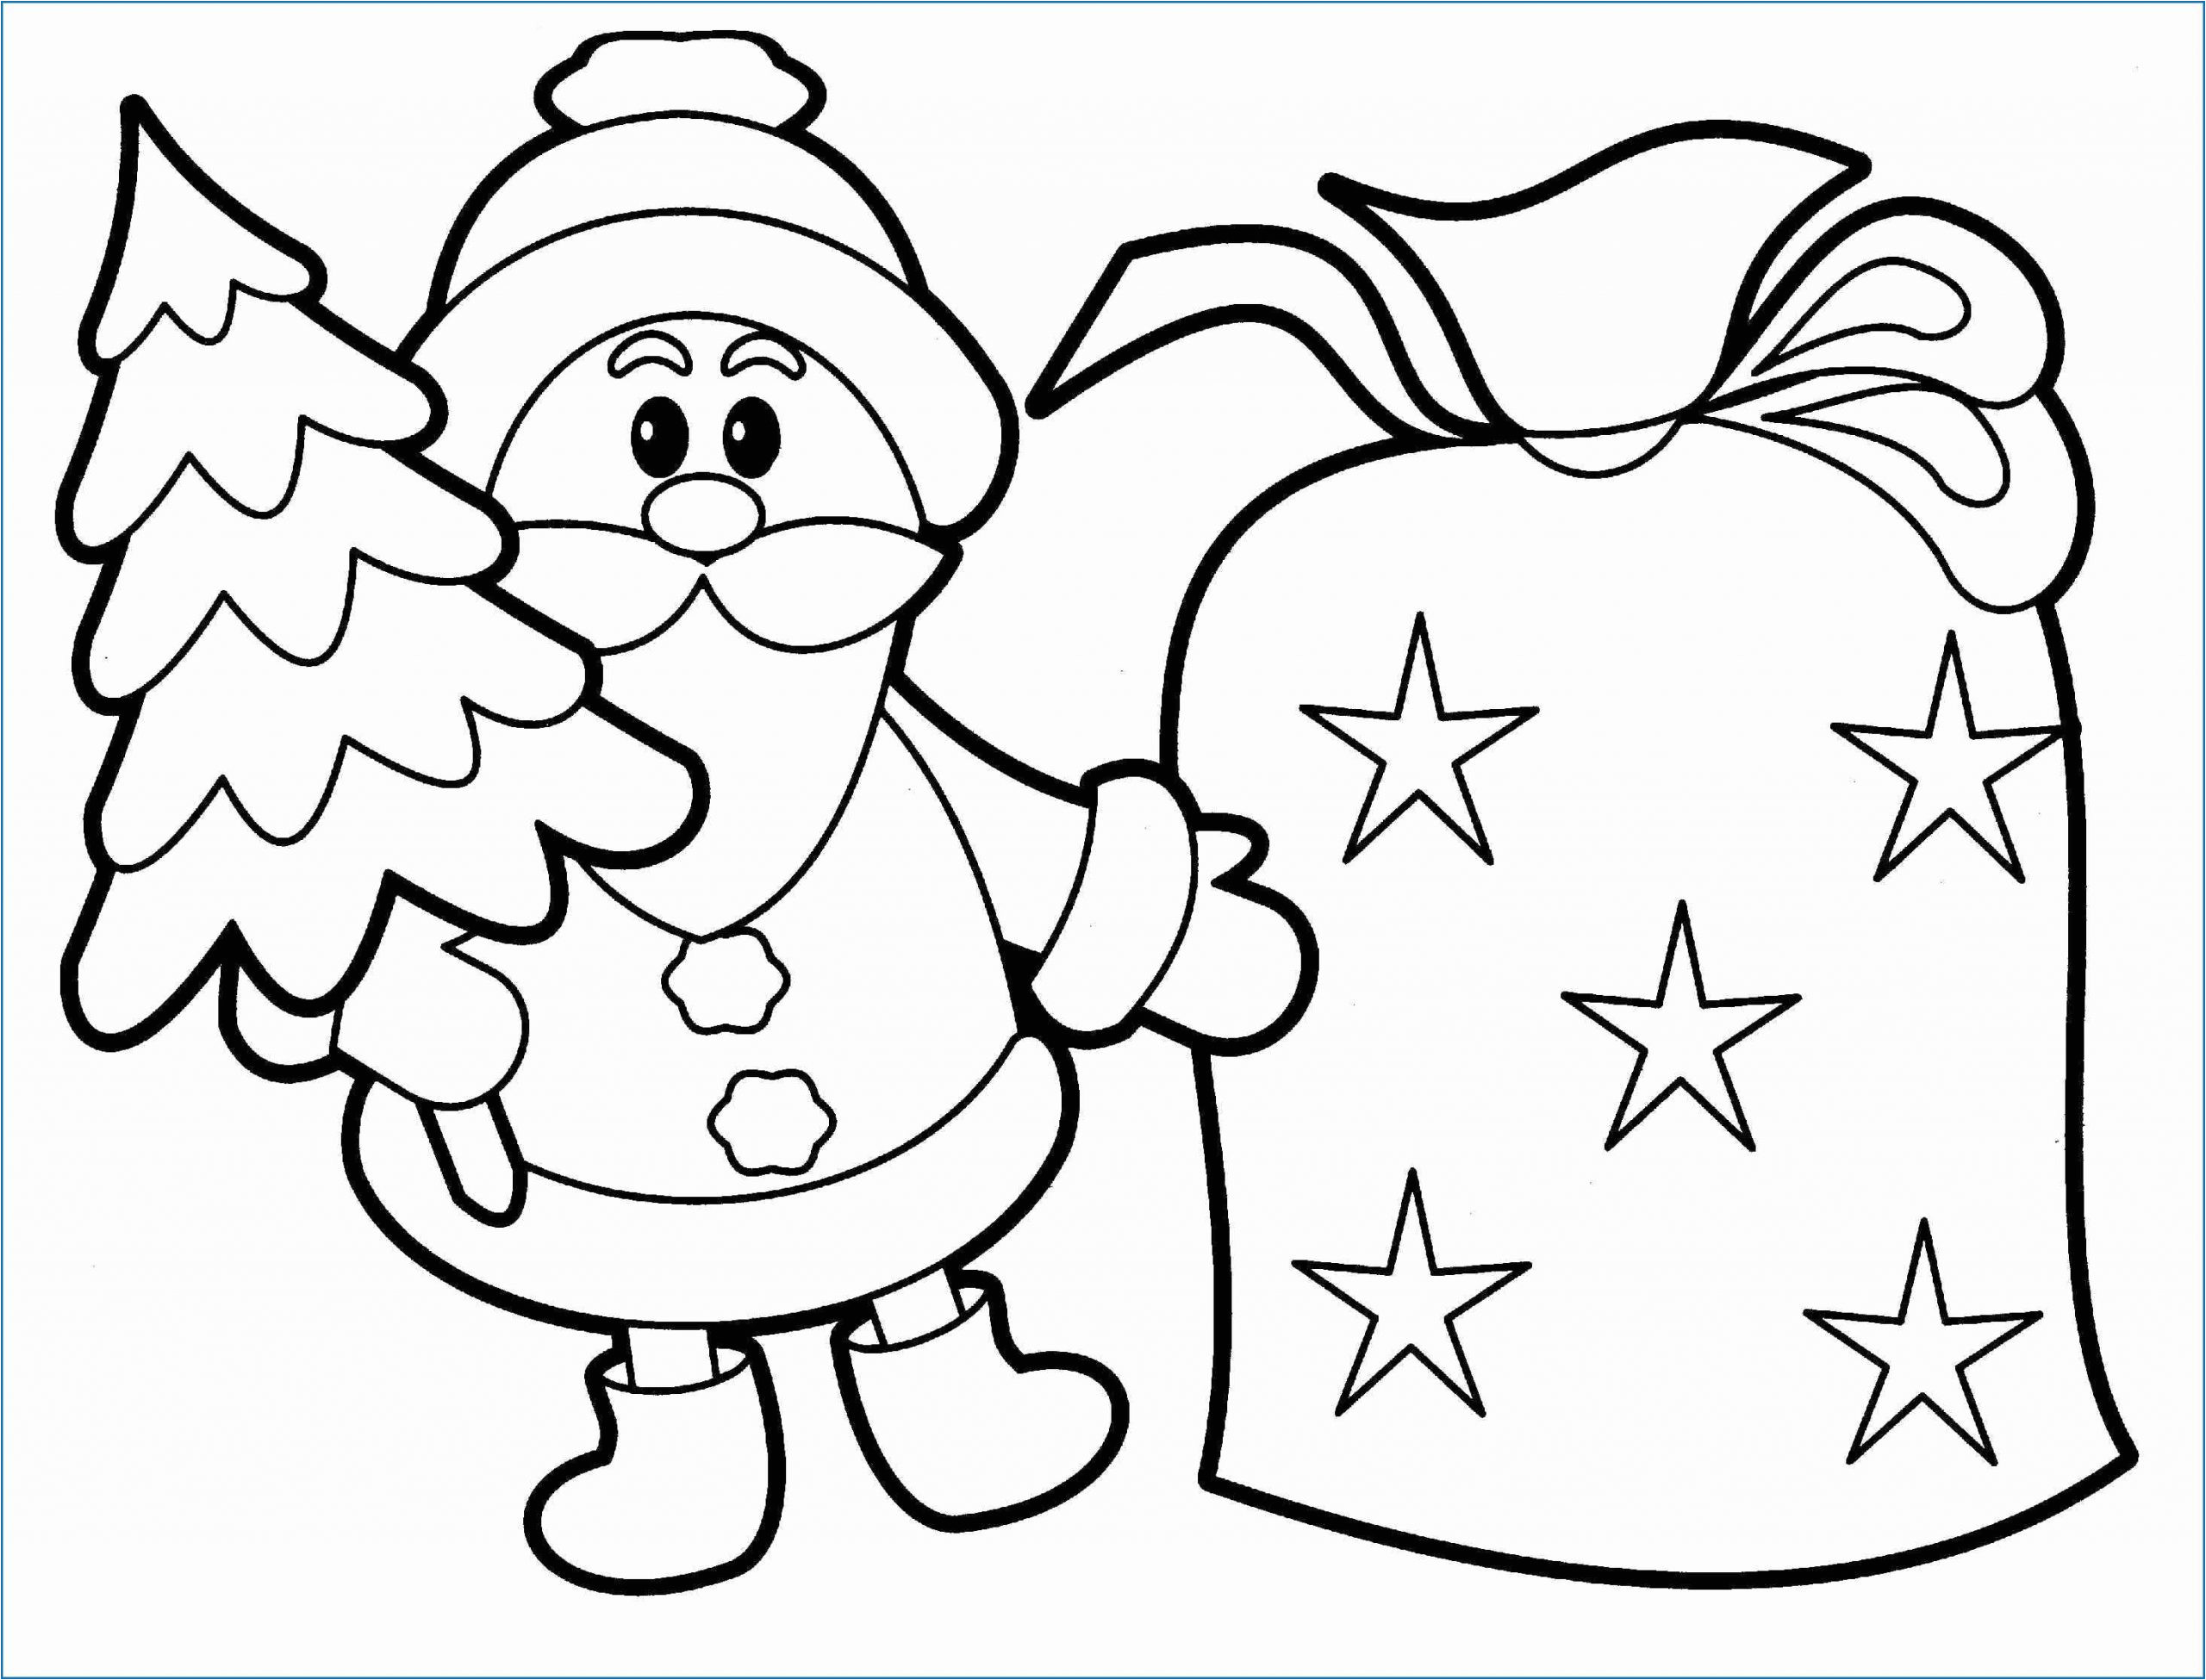 disney christmas characters coloring pages mickeyas arts great channel bestofcoloring of mouse jessie zombies junior sheets picture scaled